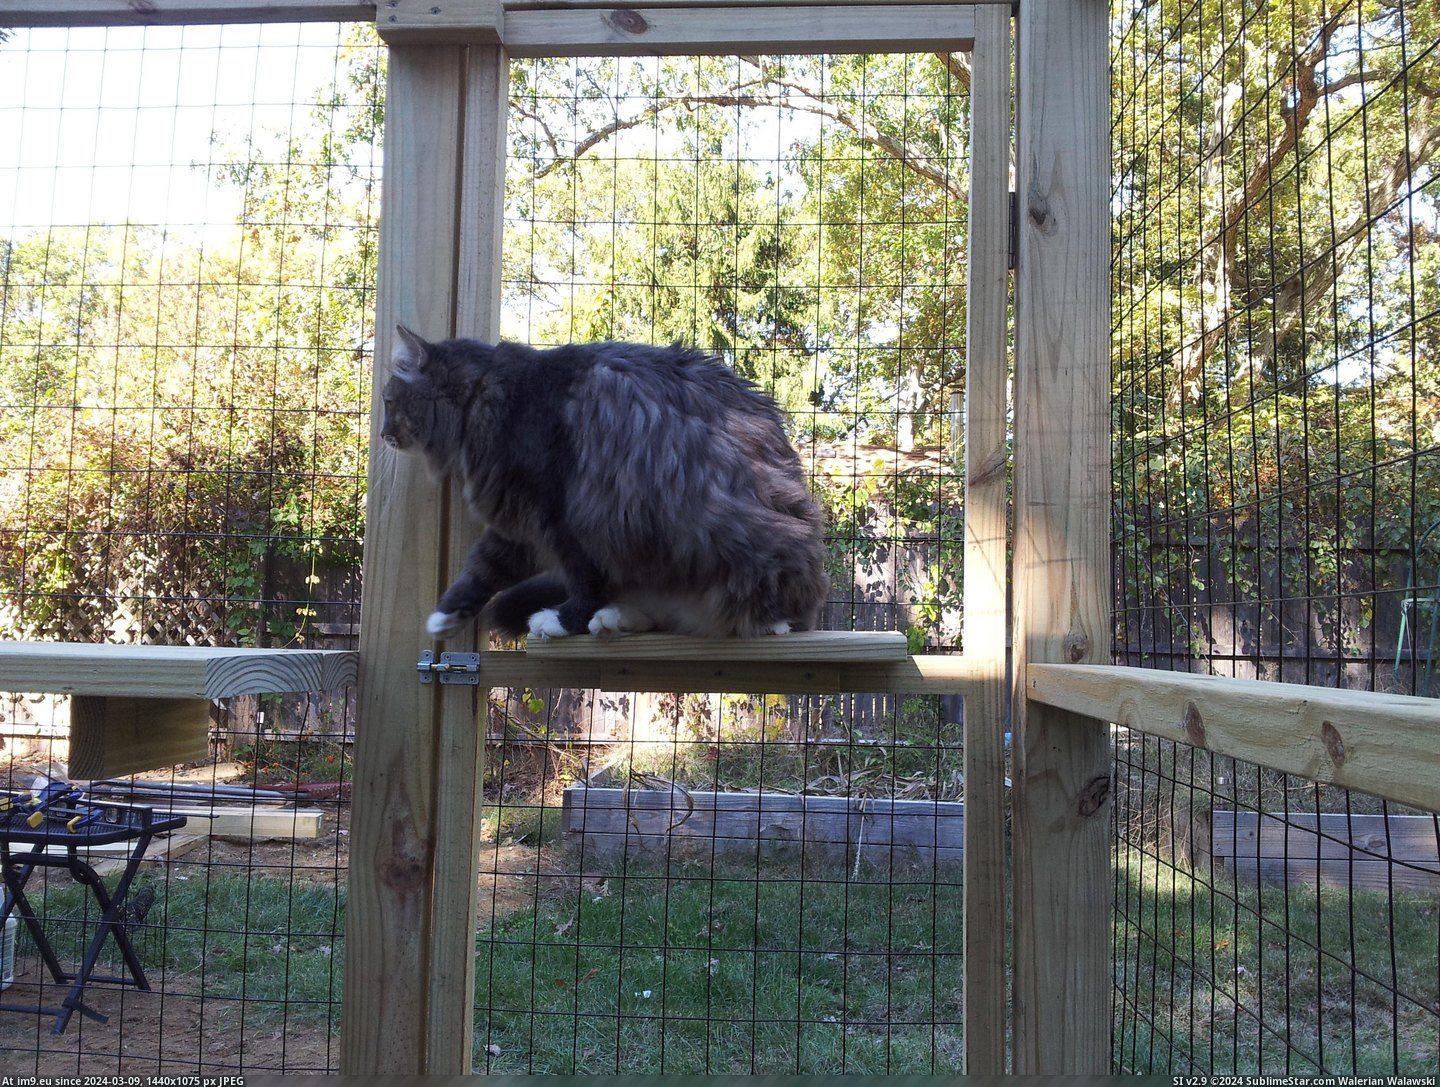 #Cats #For #Enclosure #Indoor #Our #Finished [Cats] We finished the outside enclosure for our indoor cats! (x-post -r-pics) 9 Pic. (Bild von album My r/CATS favs))